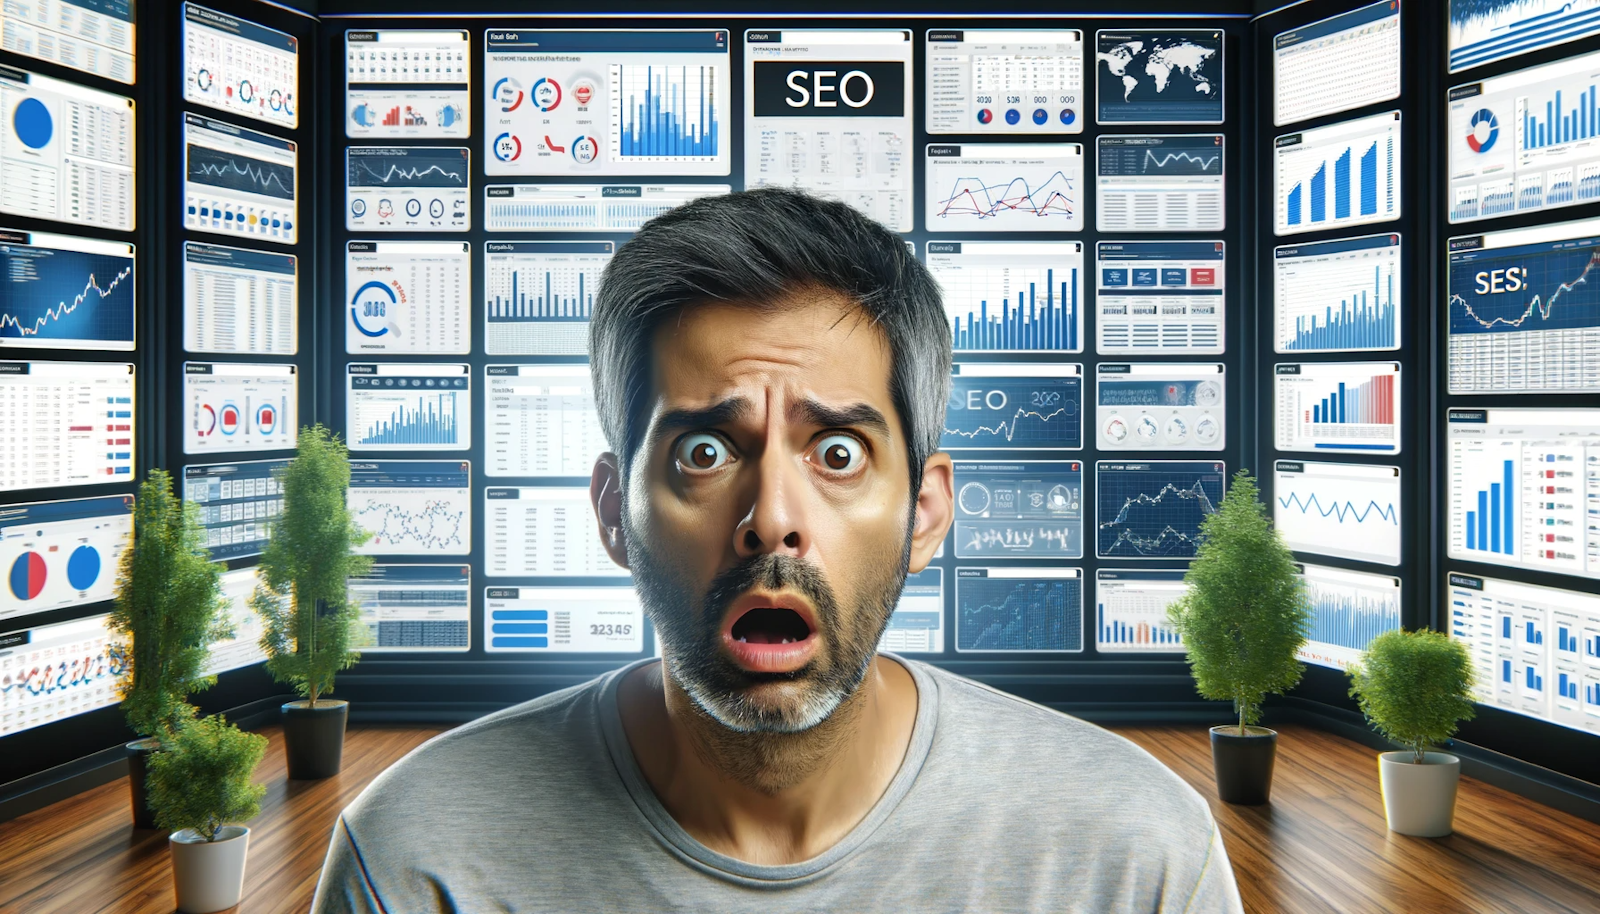 picture showing a man having difficulties with all the data and informations of classic SEO tools